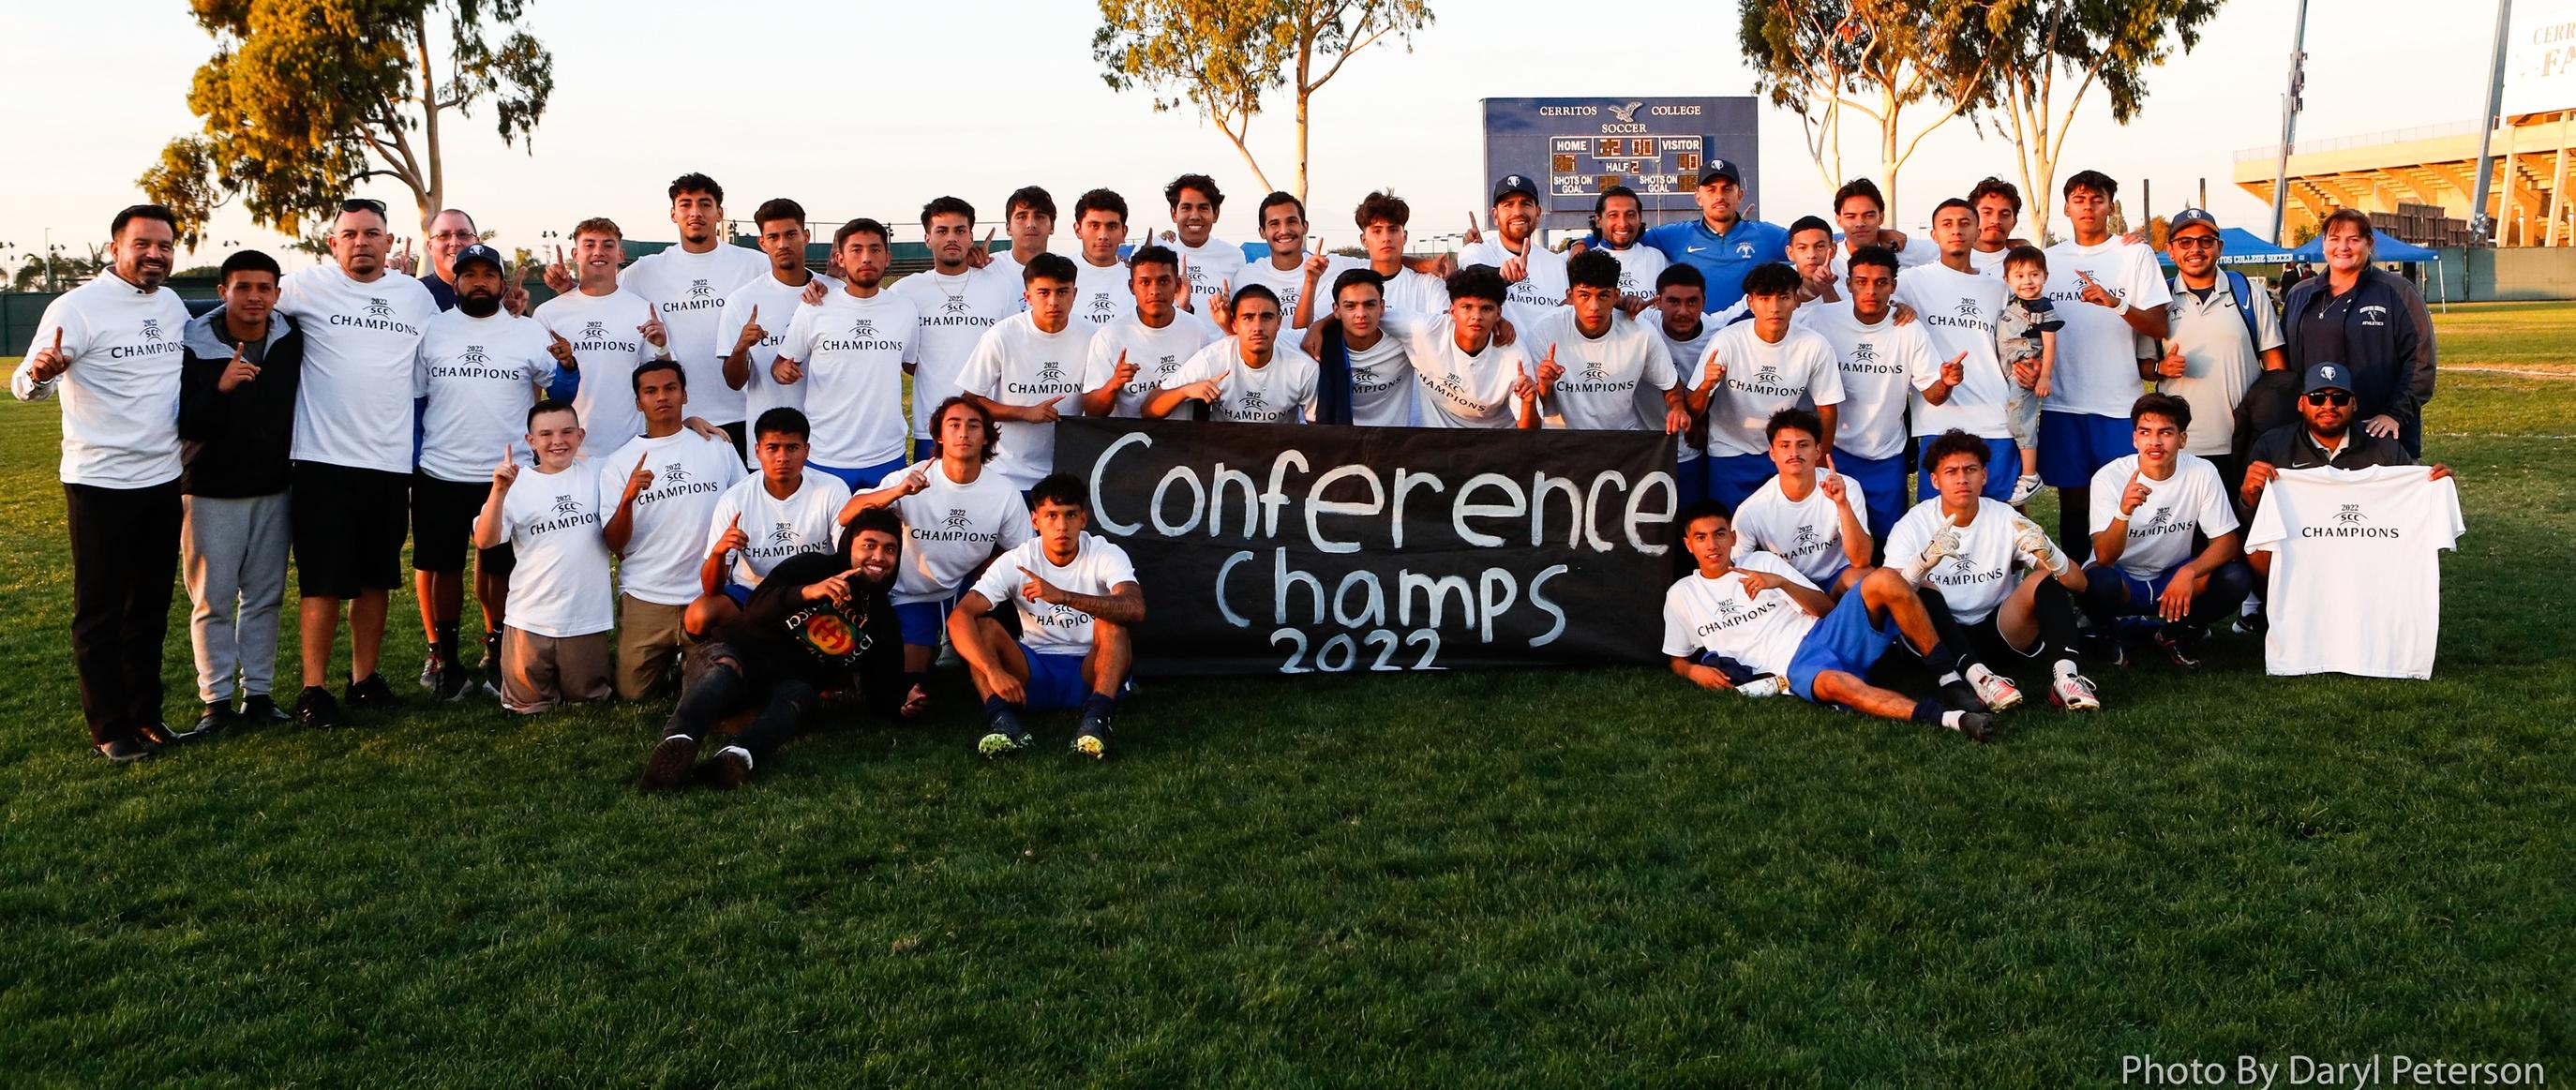 Cerritos men's soccer clinched conference title